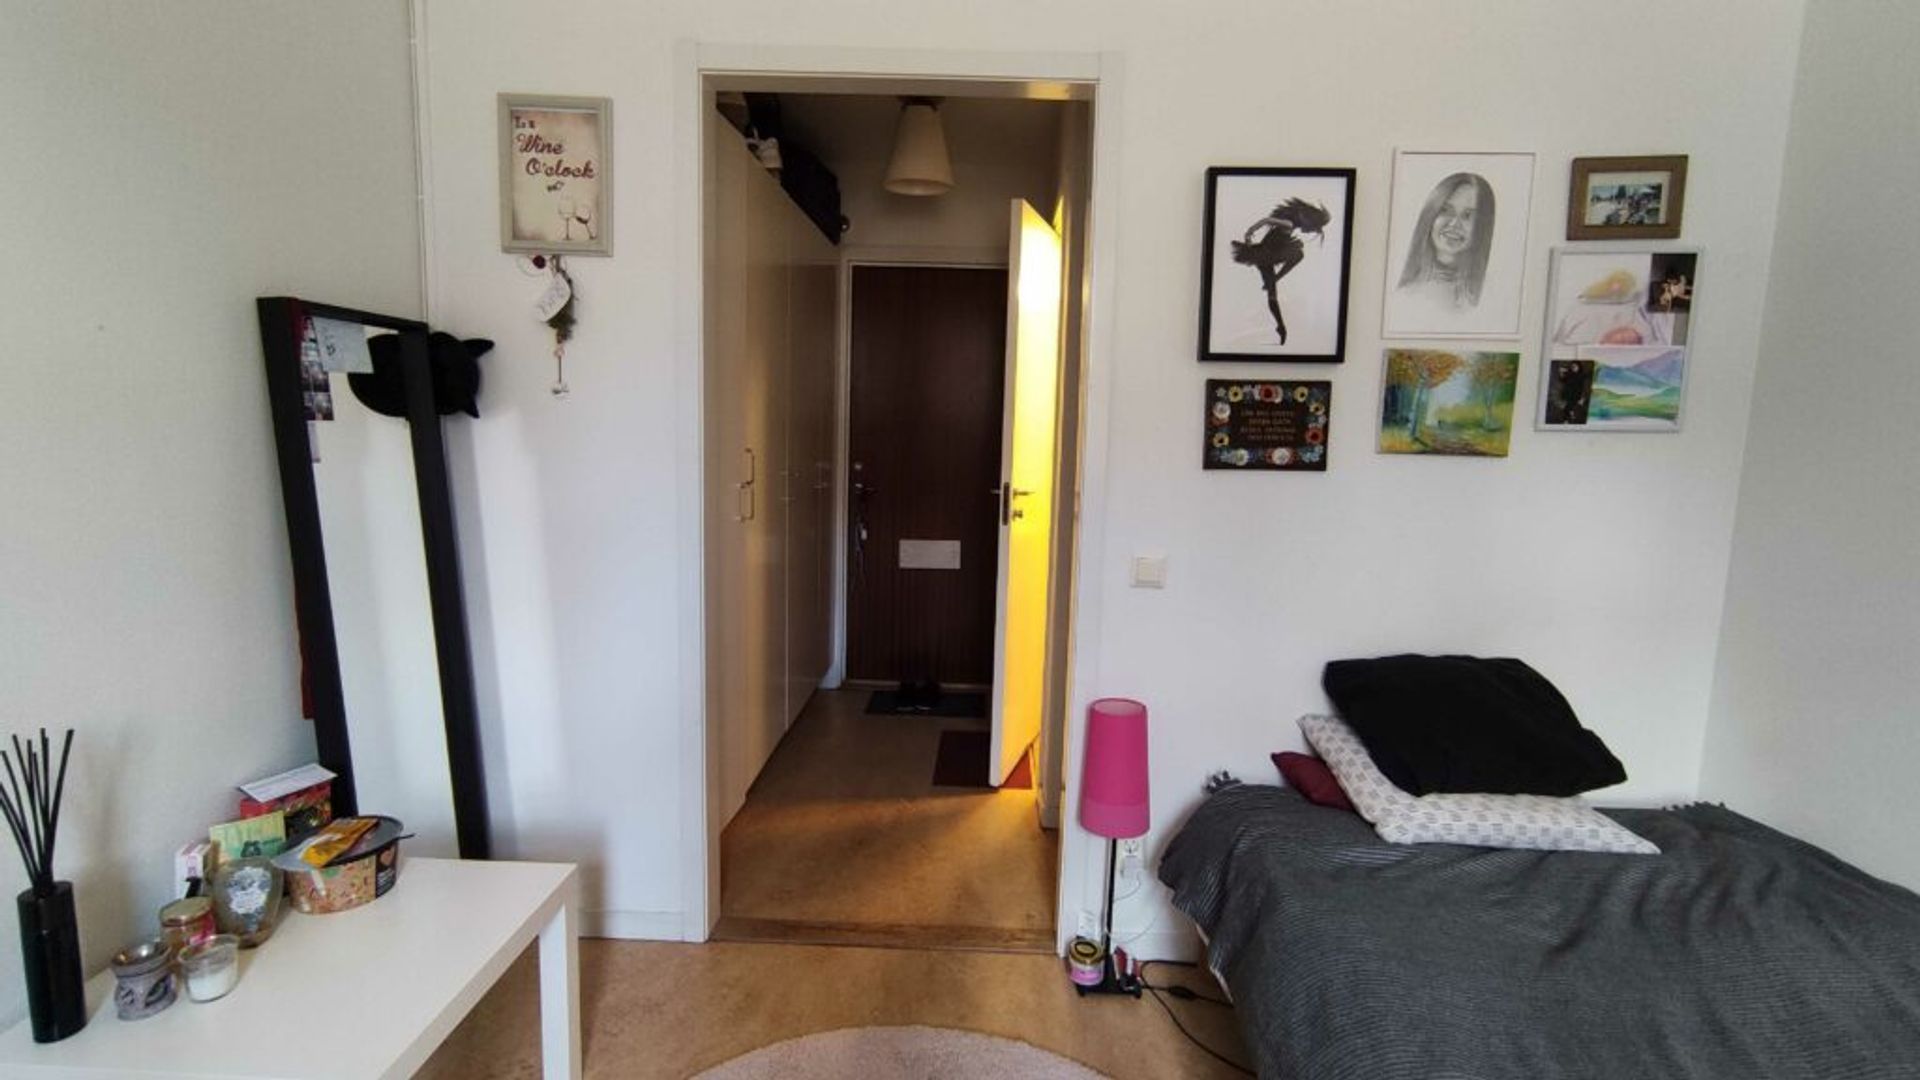 An entrance to an accommodation with pictures, bed and a mirror. 